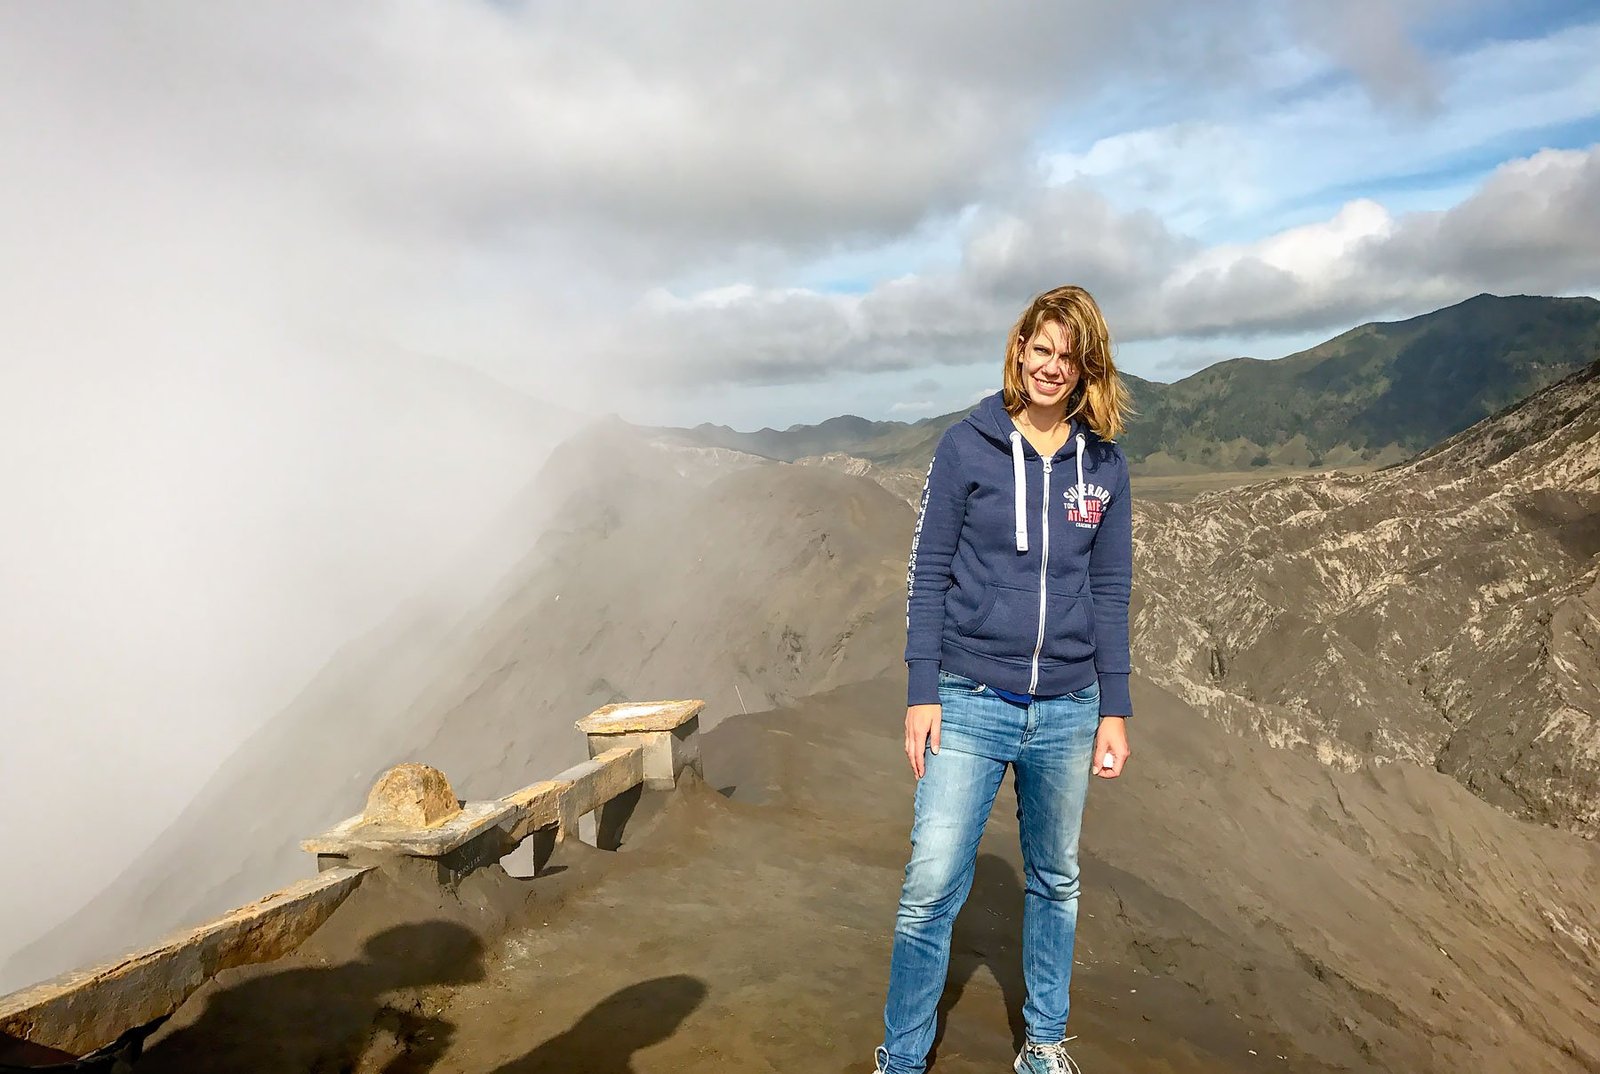 Mount Bromo Sunrise Tour: Climbing an Active Volcano in Indonesia